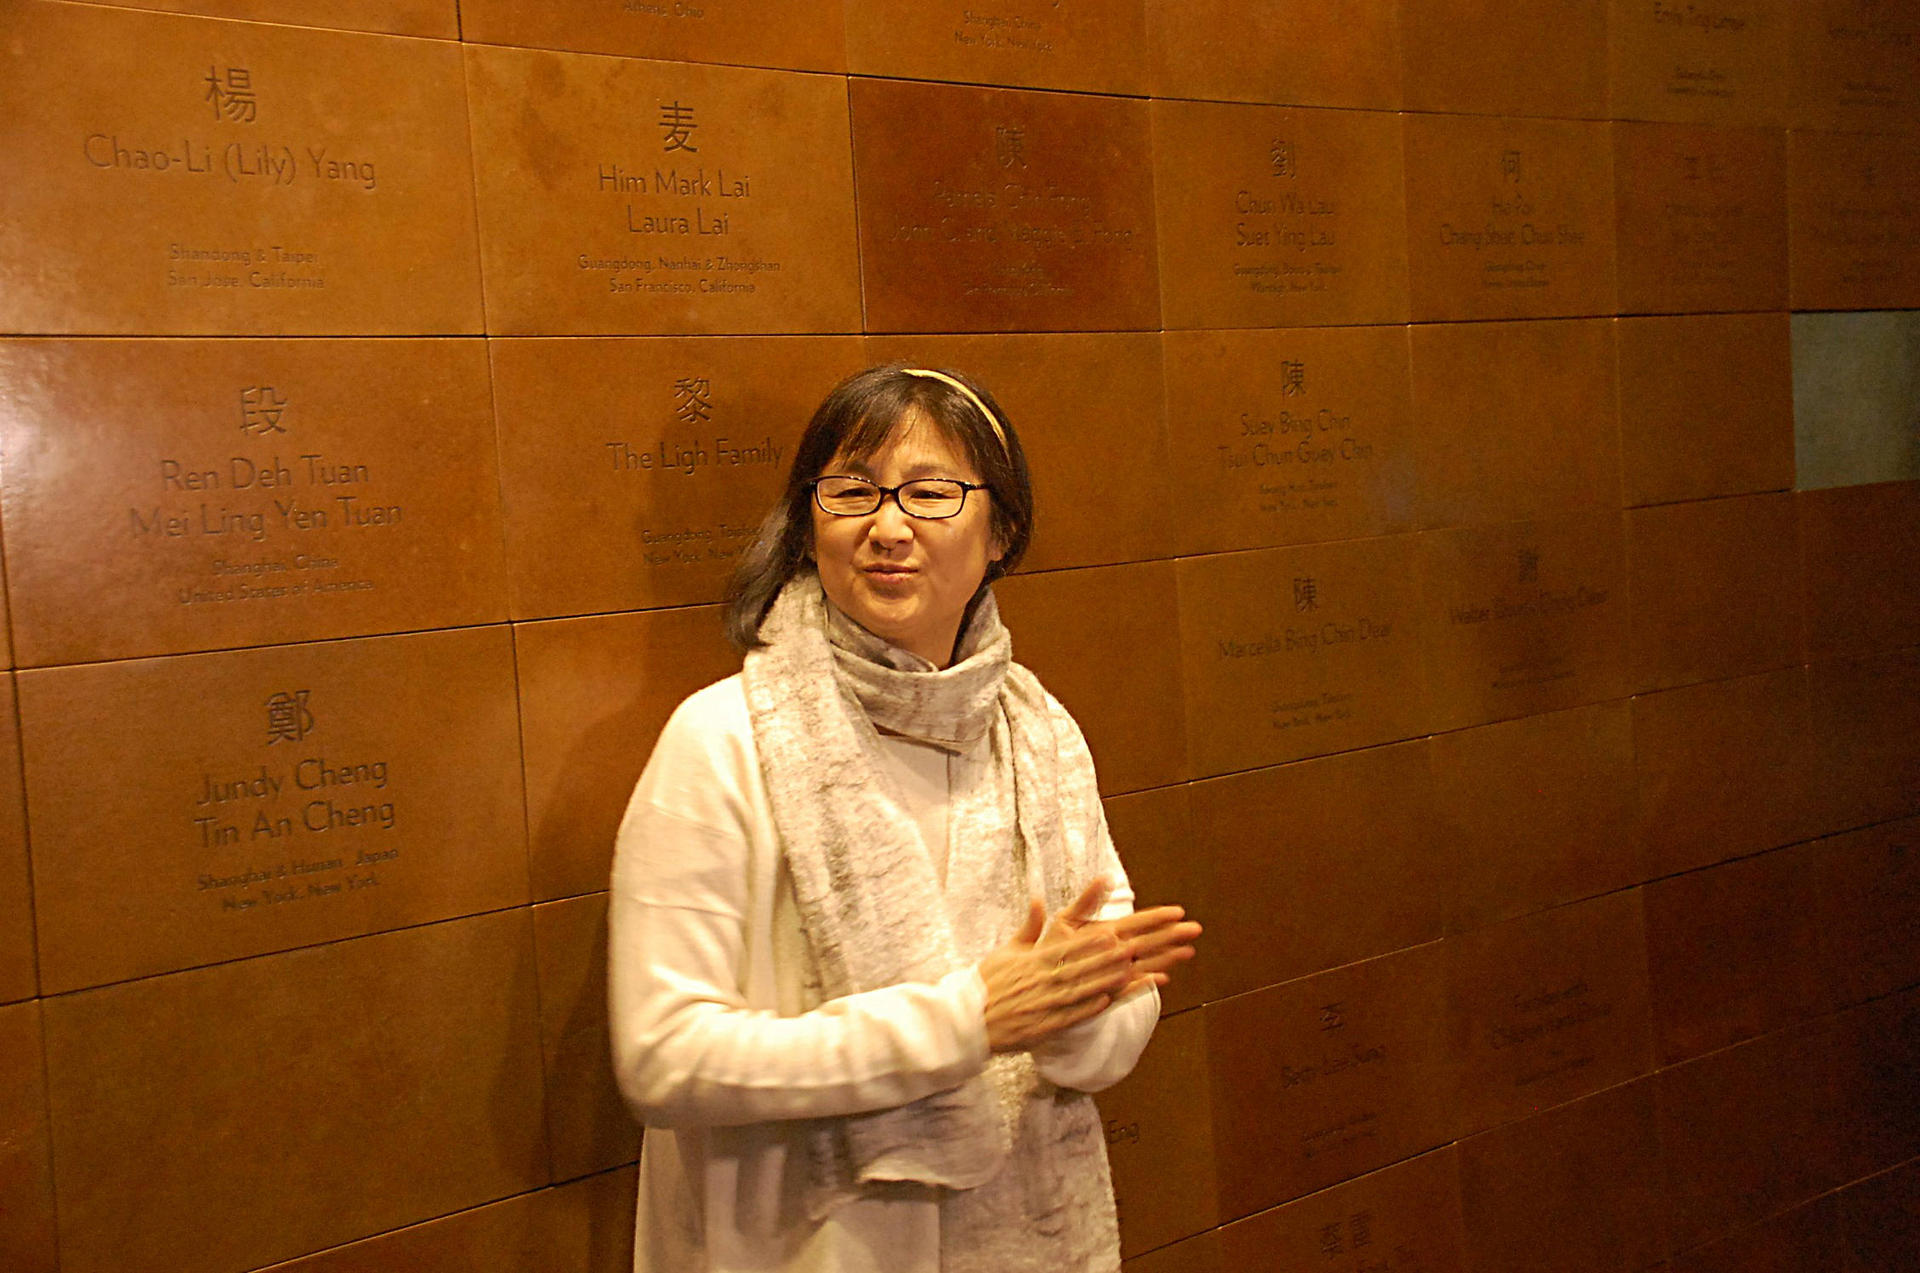 Artist and architect Maya Lin in front of MOCA's Journey Wall.